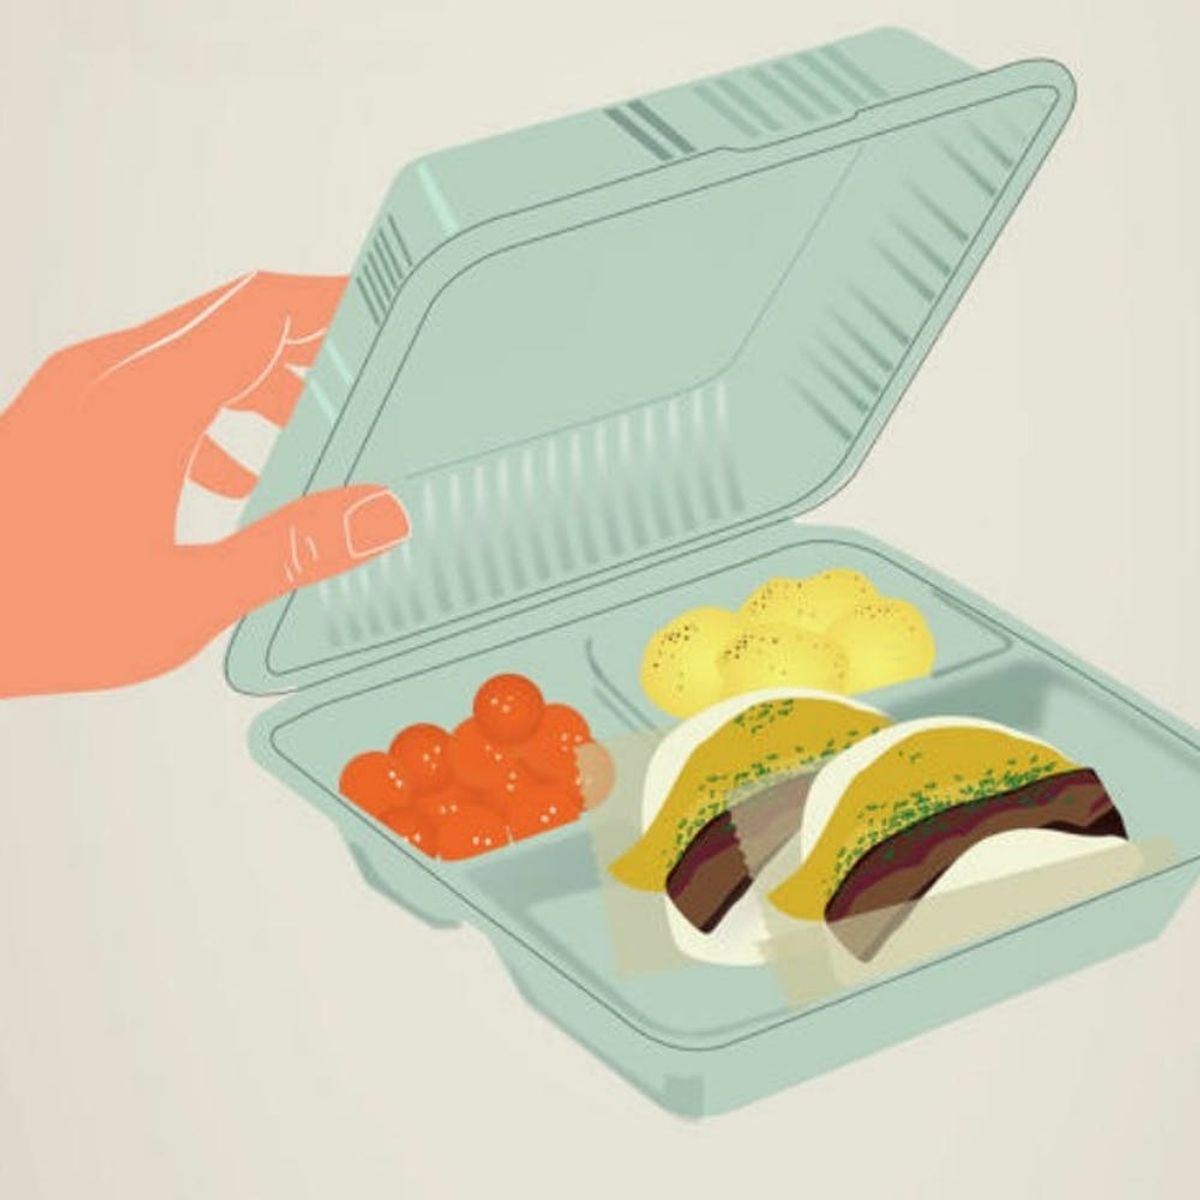 This Reusable Takeout Box Is the Answer to Our Lunchtime Woes